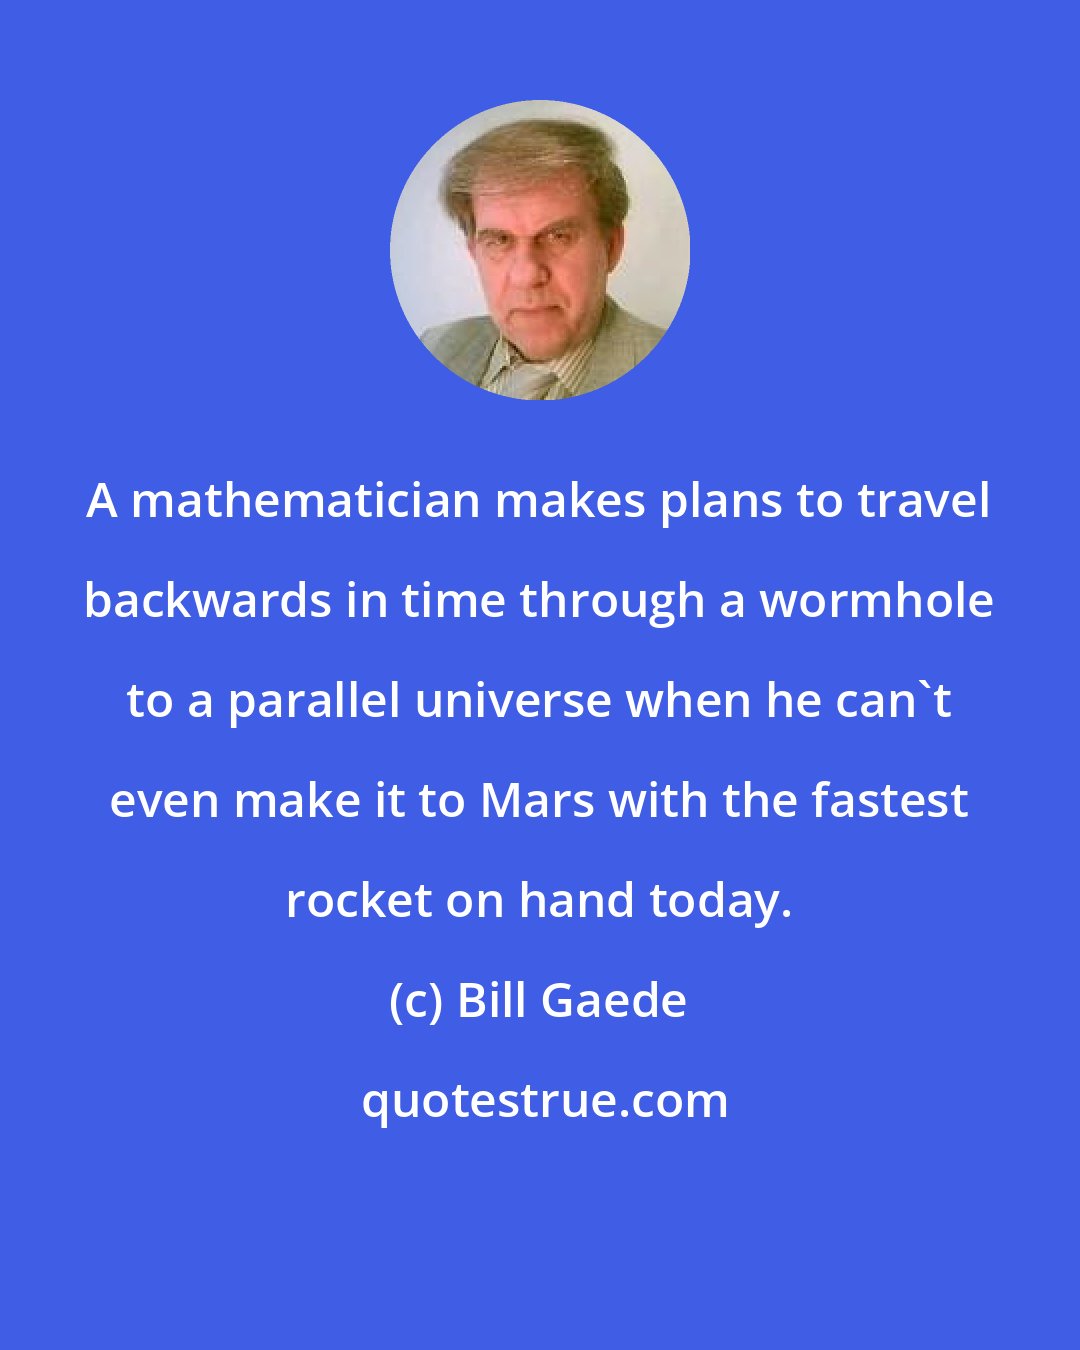 Bill Gaede: A mathematician makes plans to travel backwards in time through a wormhole to a parallel universe when he can't even make it to Mars with the fastest rocket on hand today.